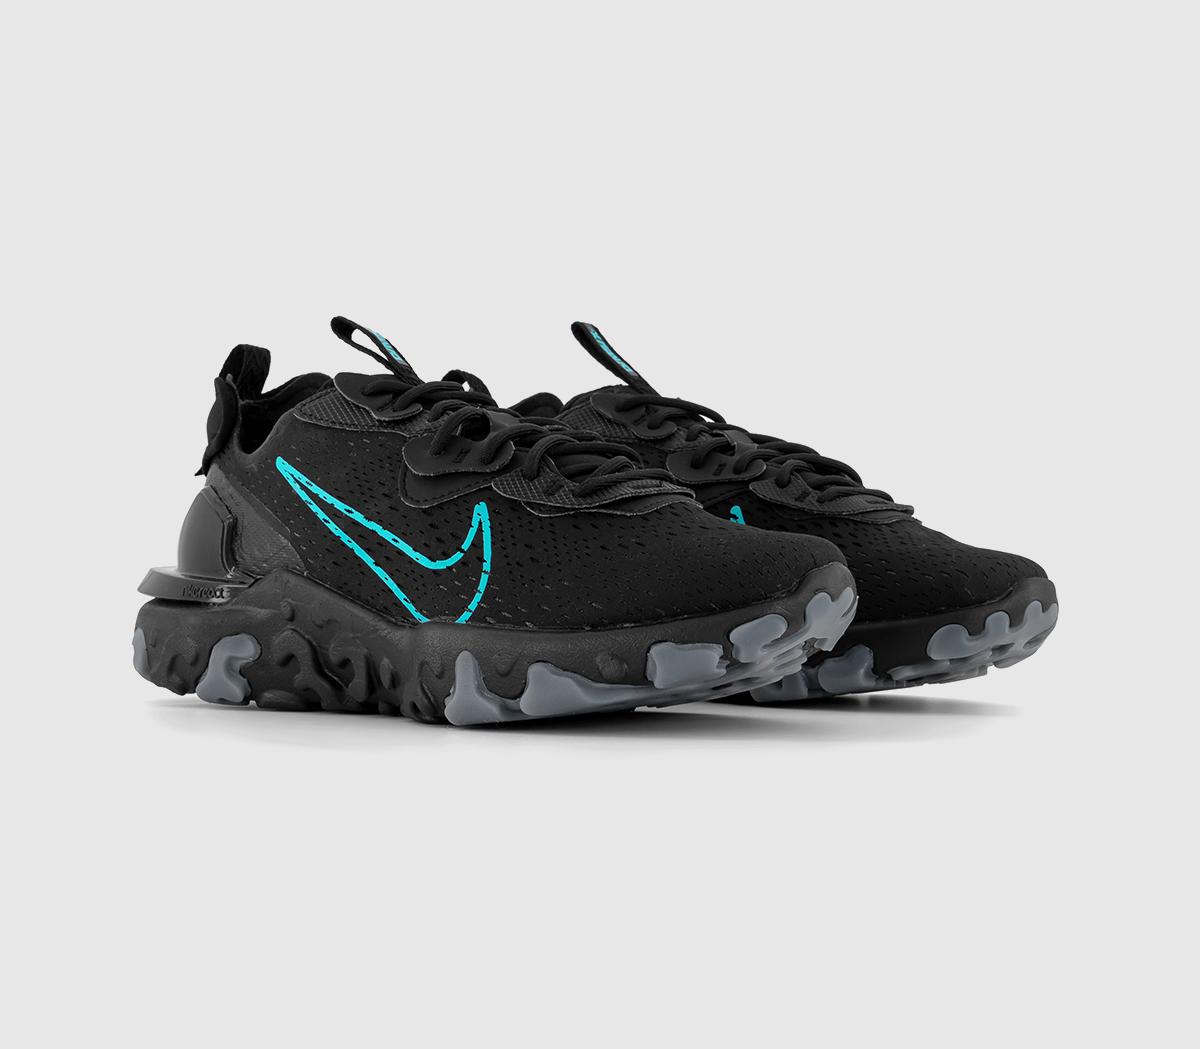 Nike React Vision Trainers Black Dusty Cactus Cool Grey, 8.5